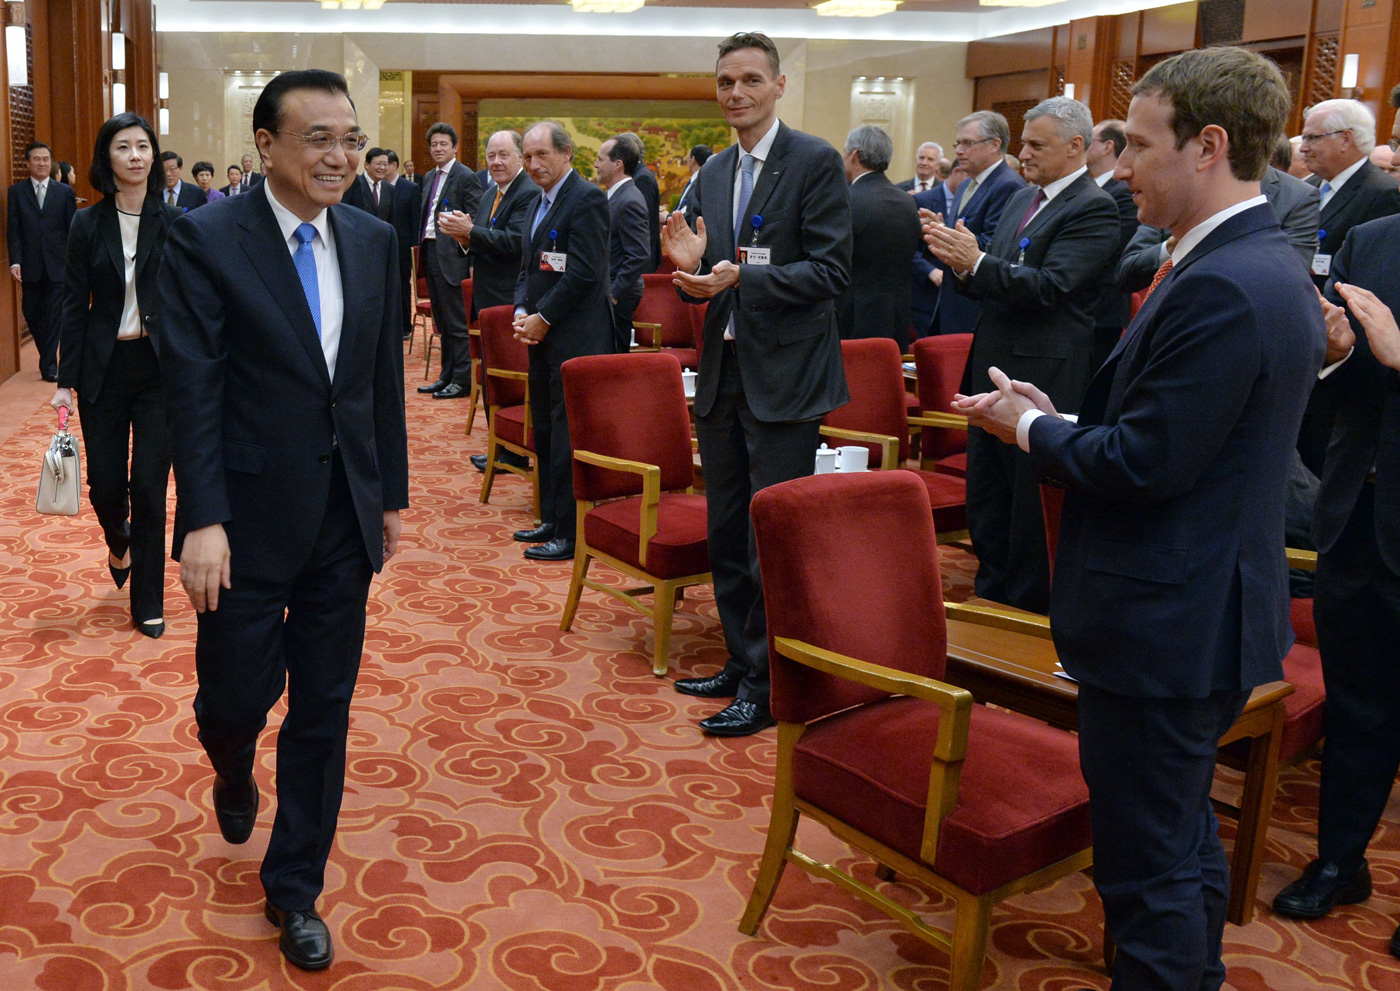 Mark Zuckerberg, right, gave Chinese Premier Li Keqiang a warm welcome at the China Development Forum earlier this year.